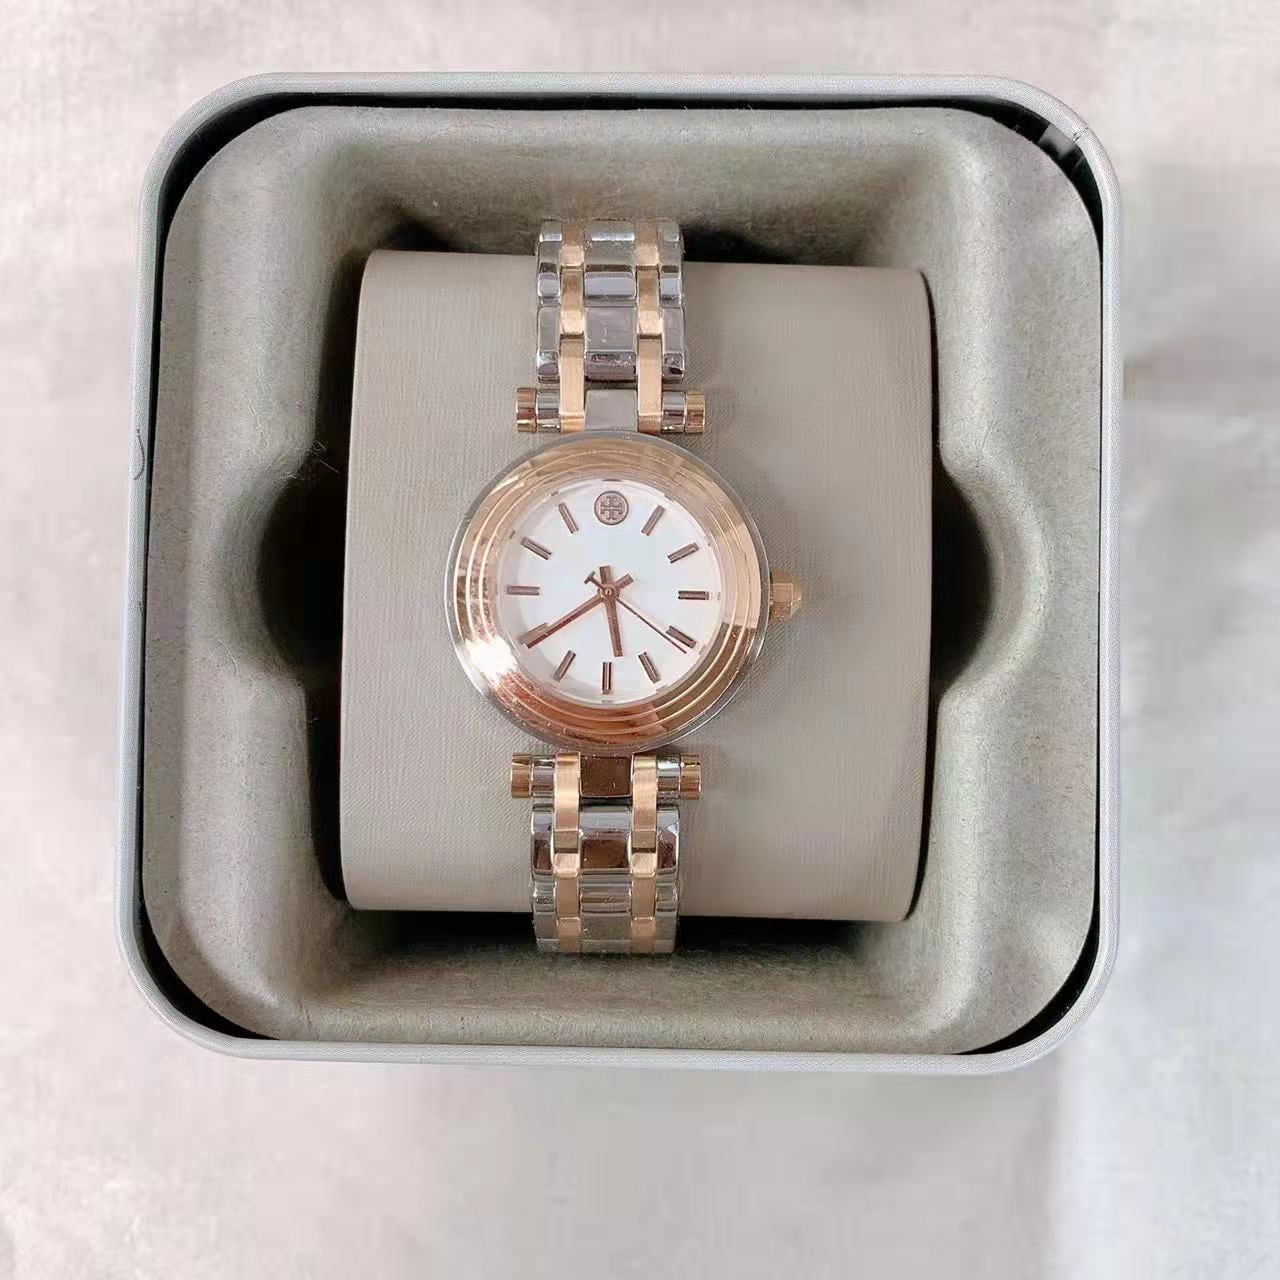 TORY BURCH TBW9011 2 TONE ROSE GOLD+SILVER,BRACELET SMALL DIAL WATCH -  